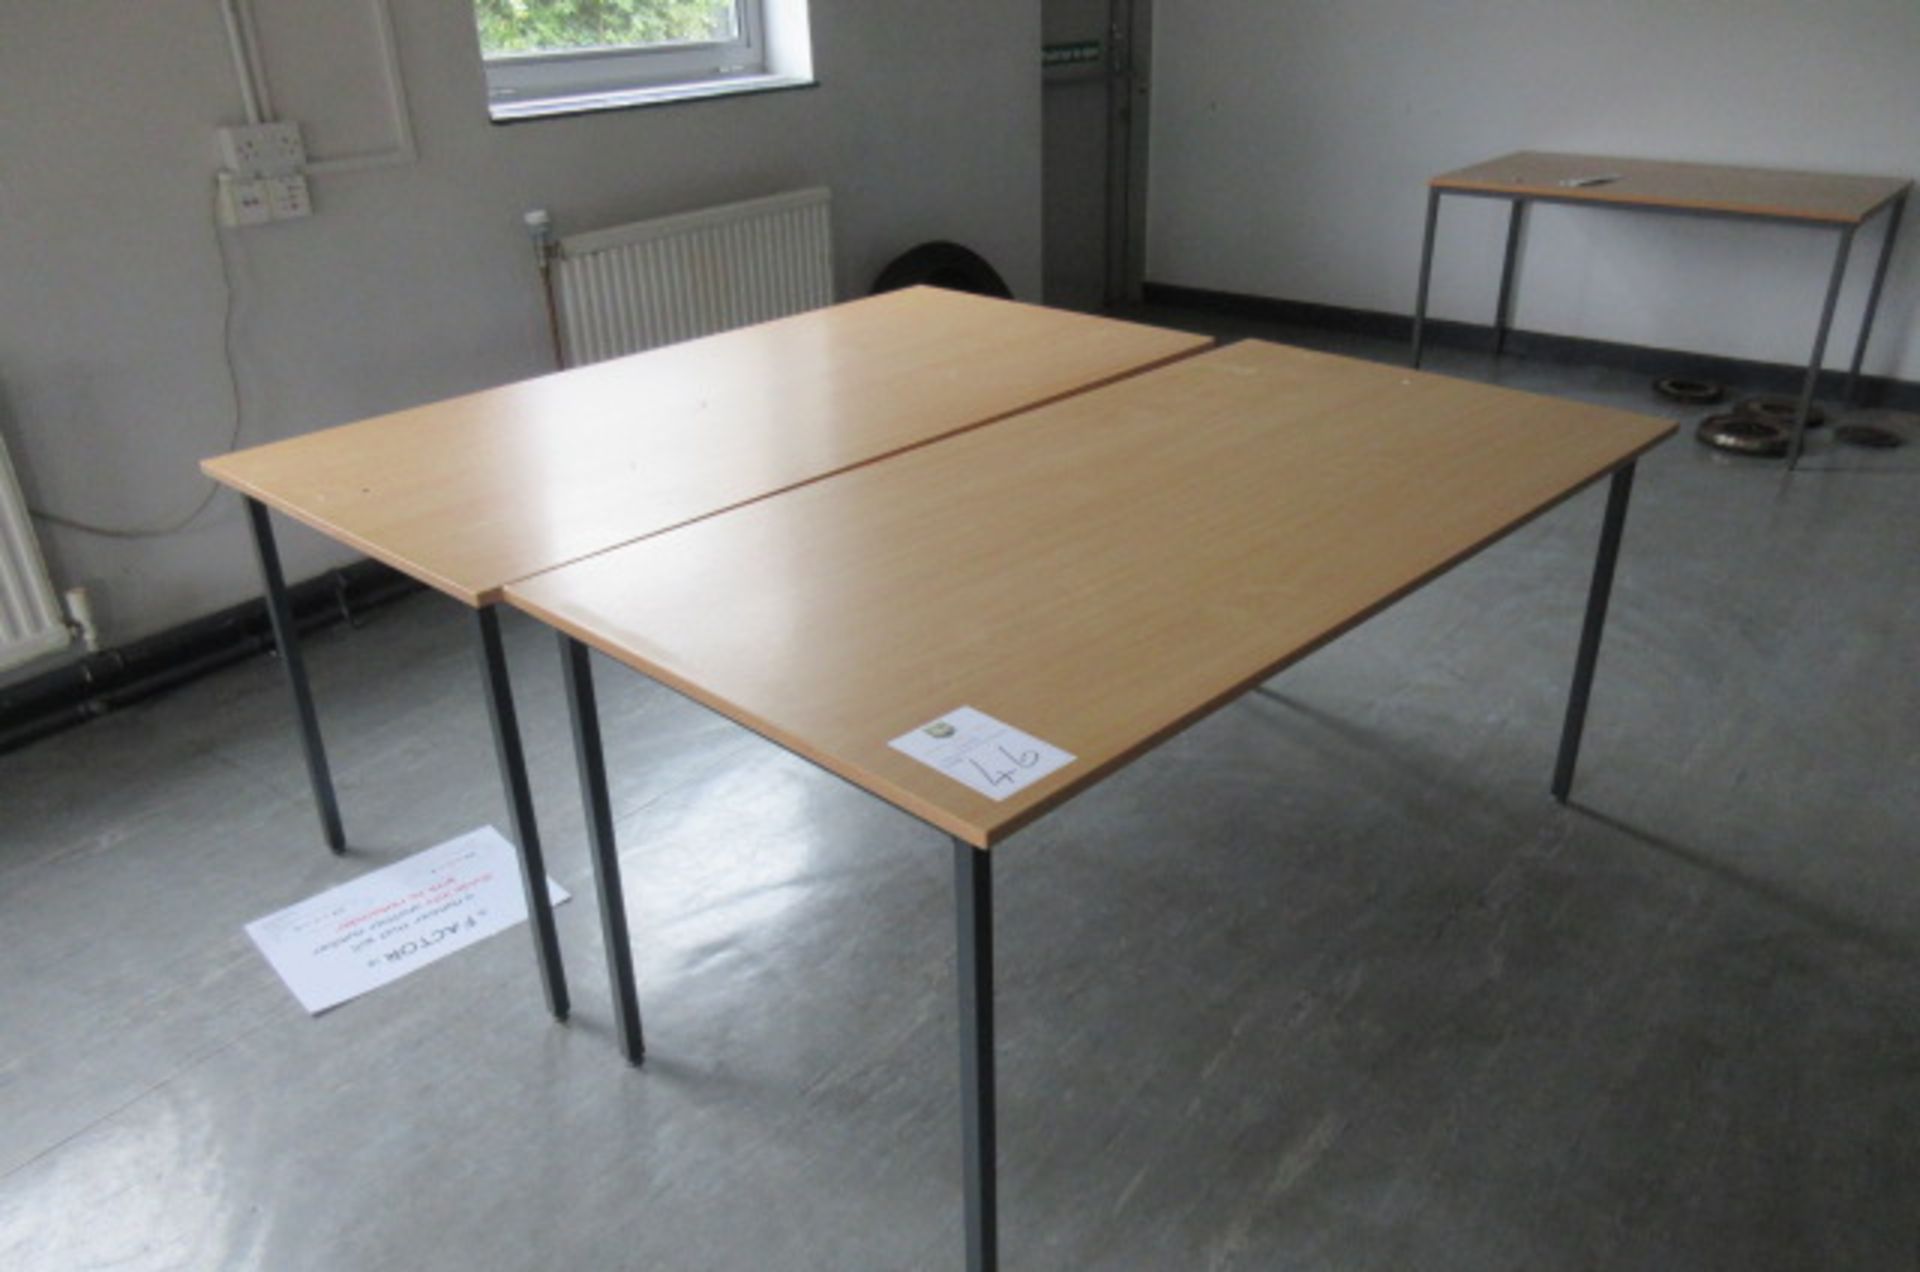 Two 1600x800mm tables